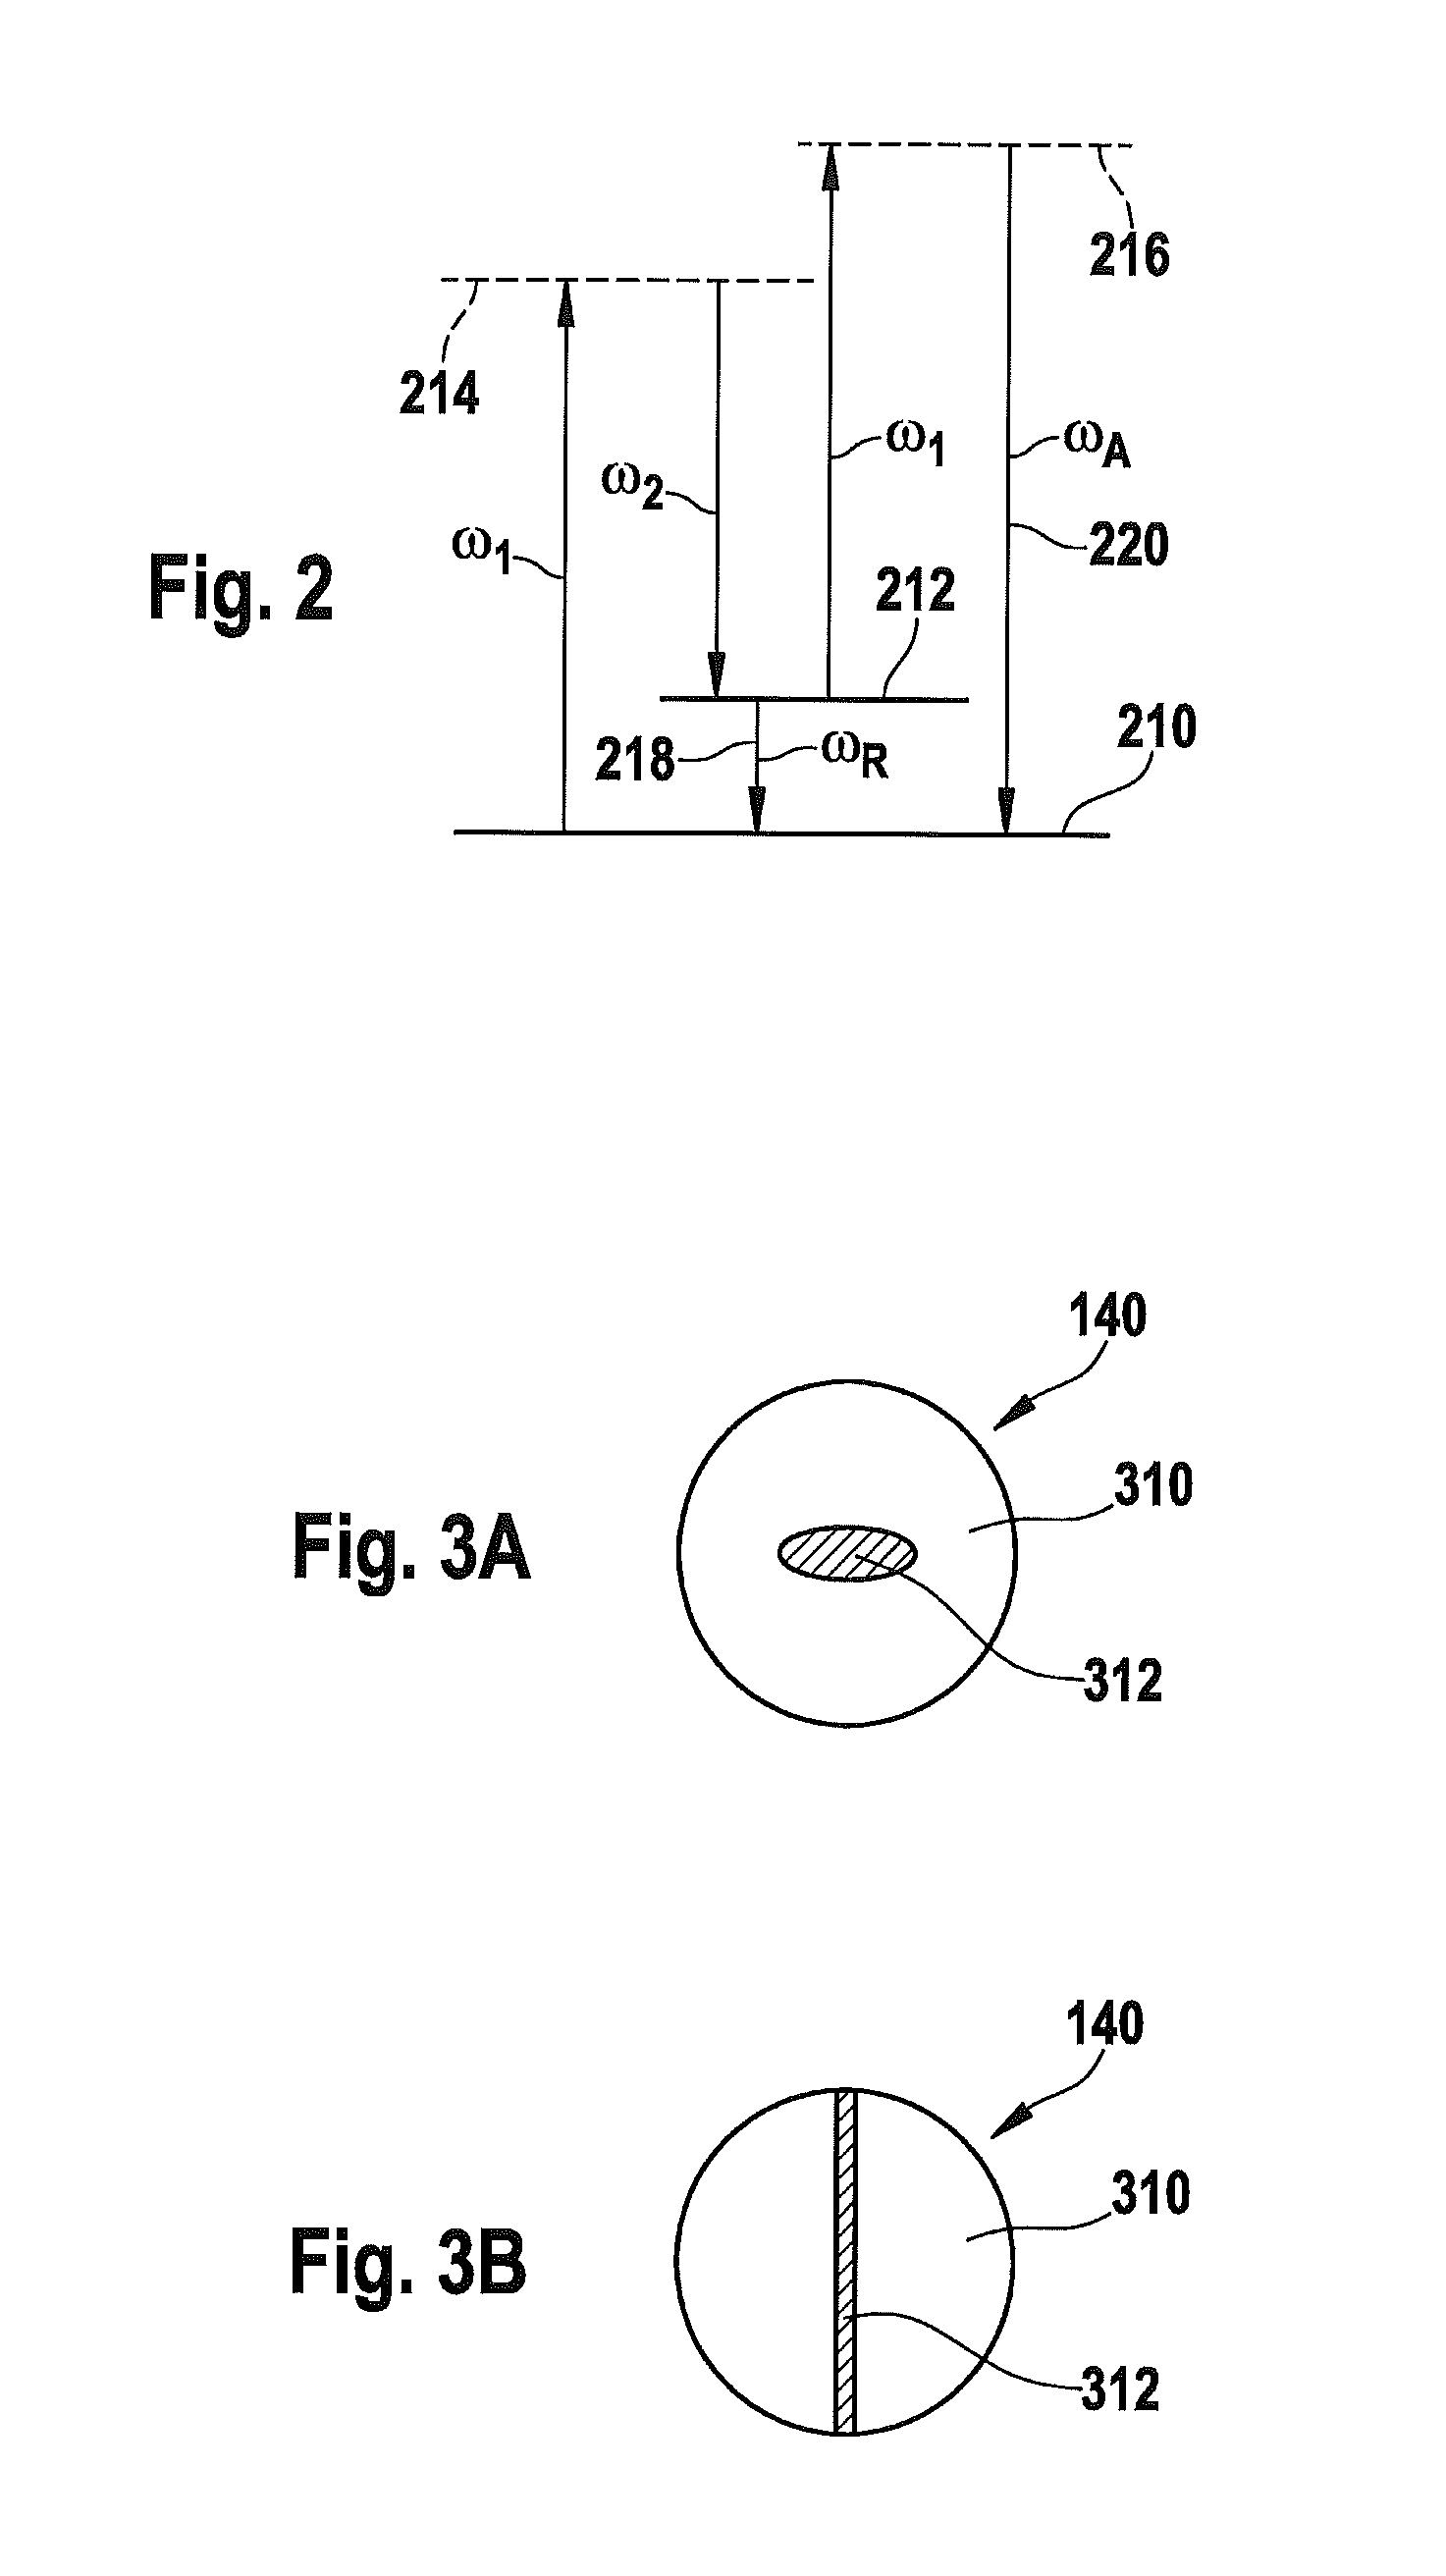 Laser microscope with a physically separating beam splitter